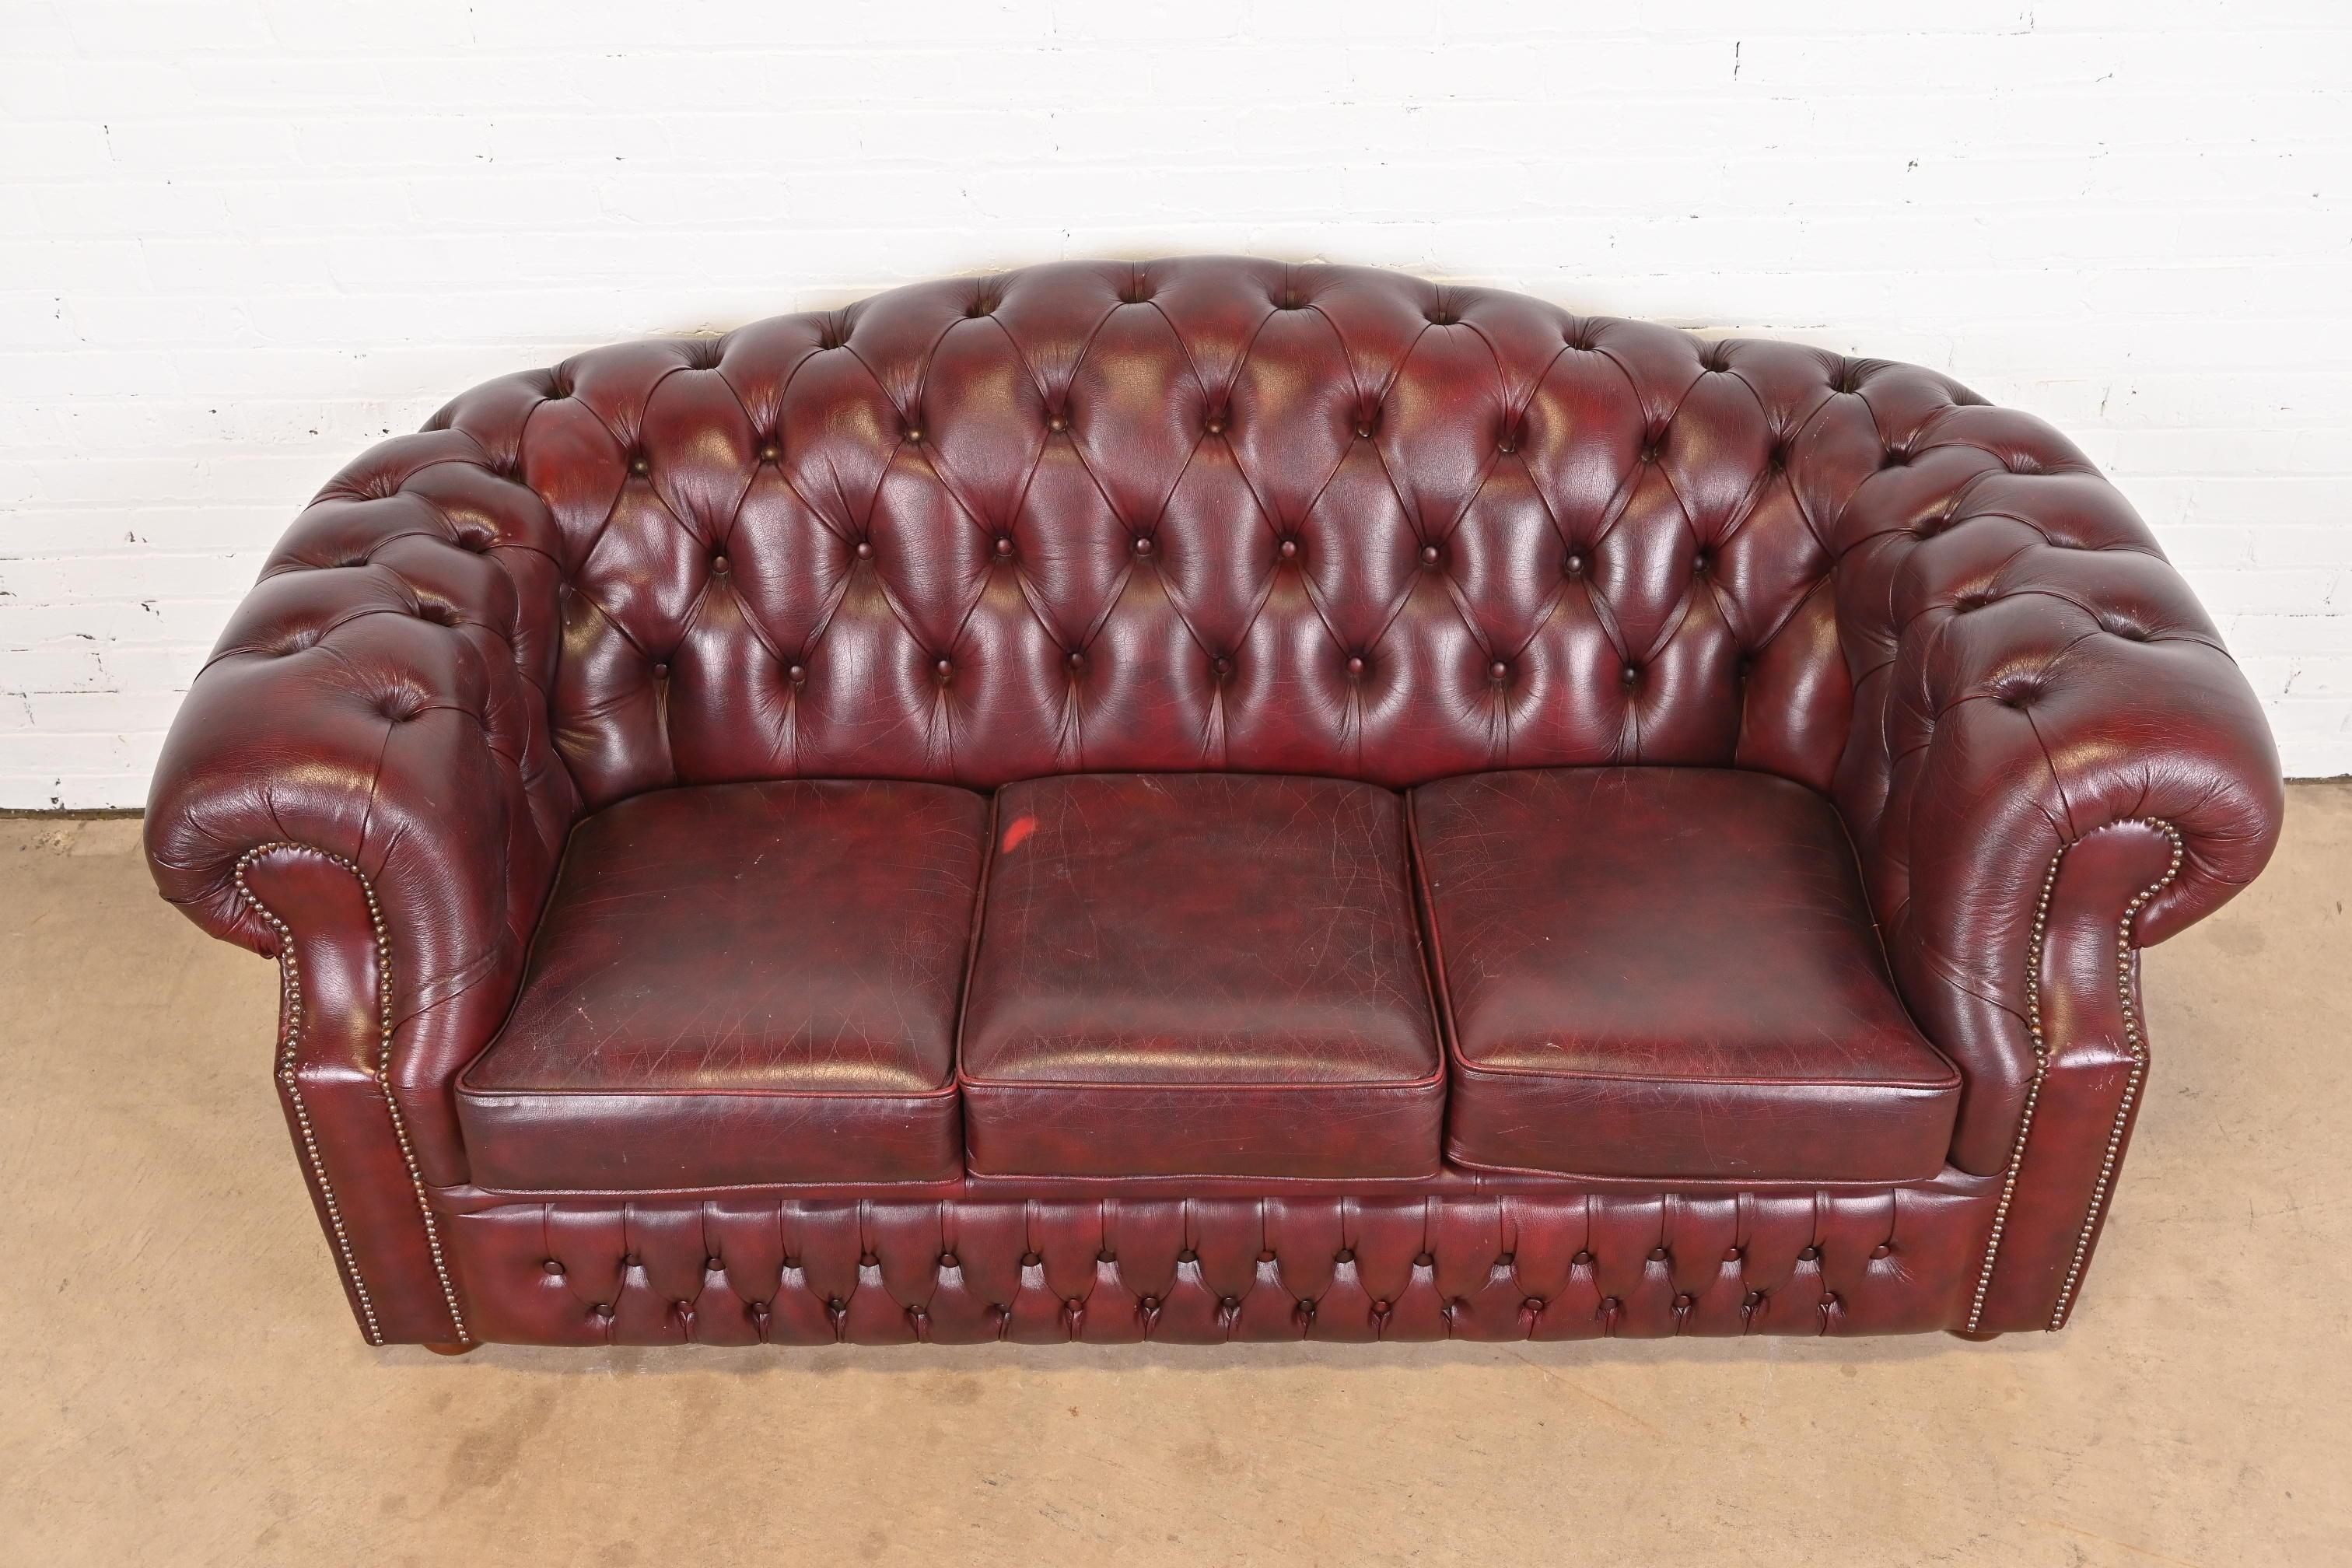 Vintage English Tufted Oxblood Leather Camelback Chesterfield Sofa 4